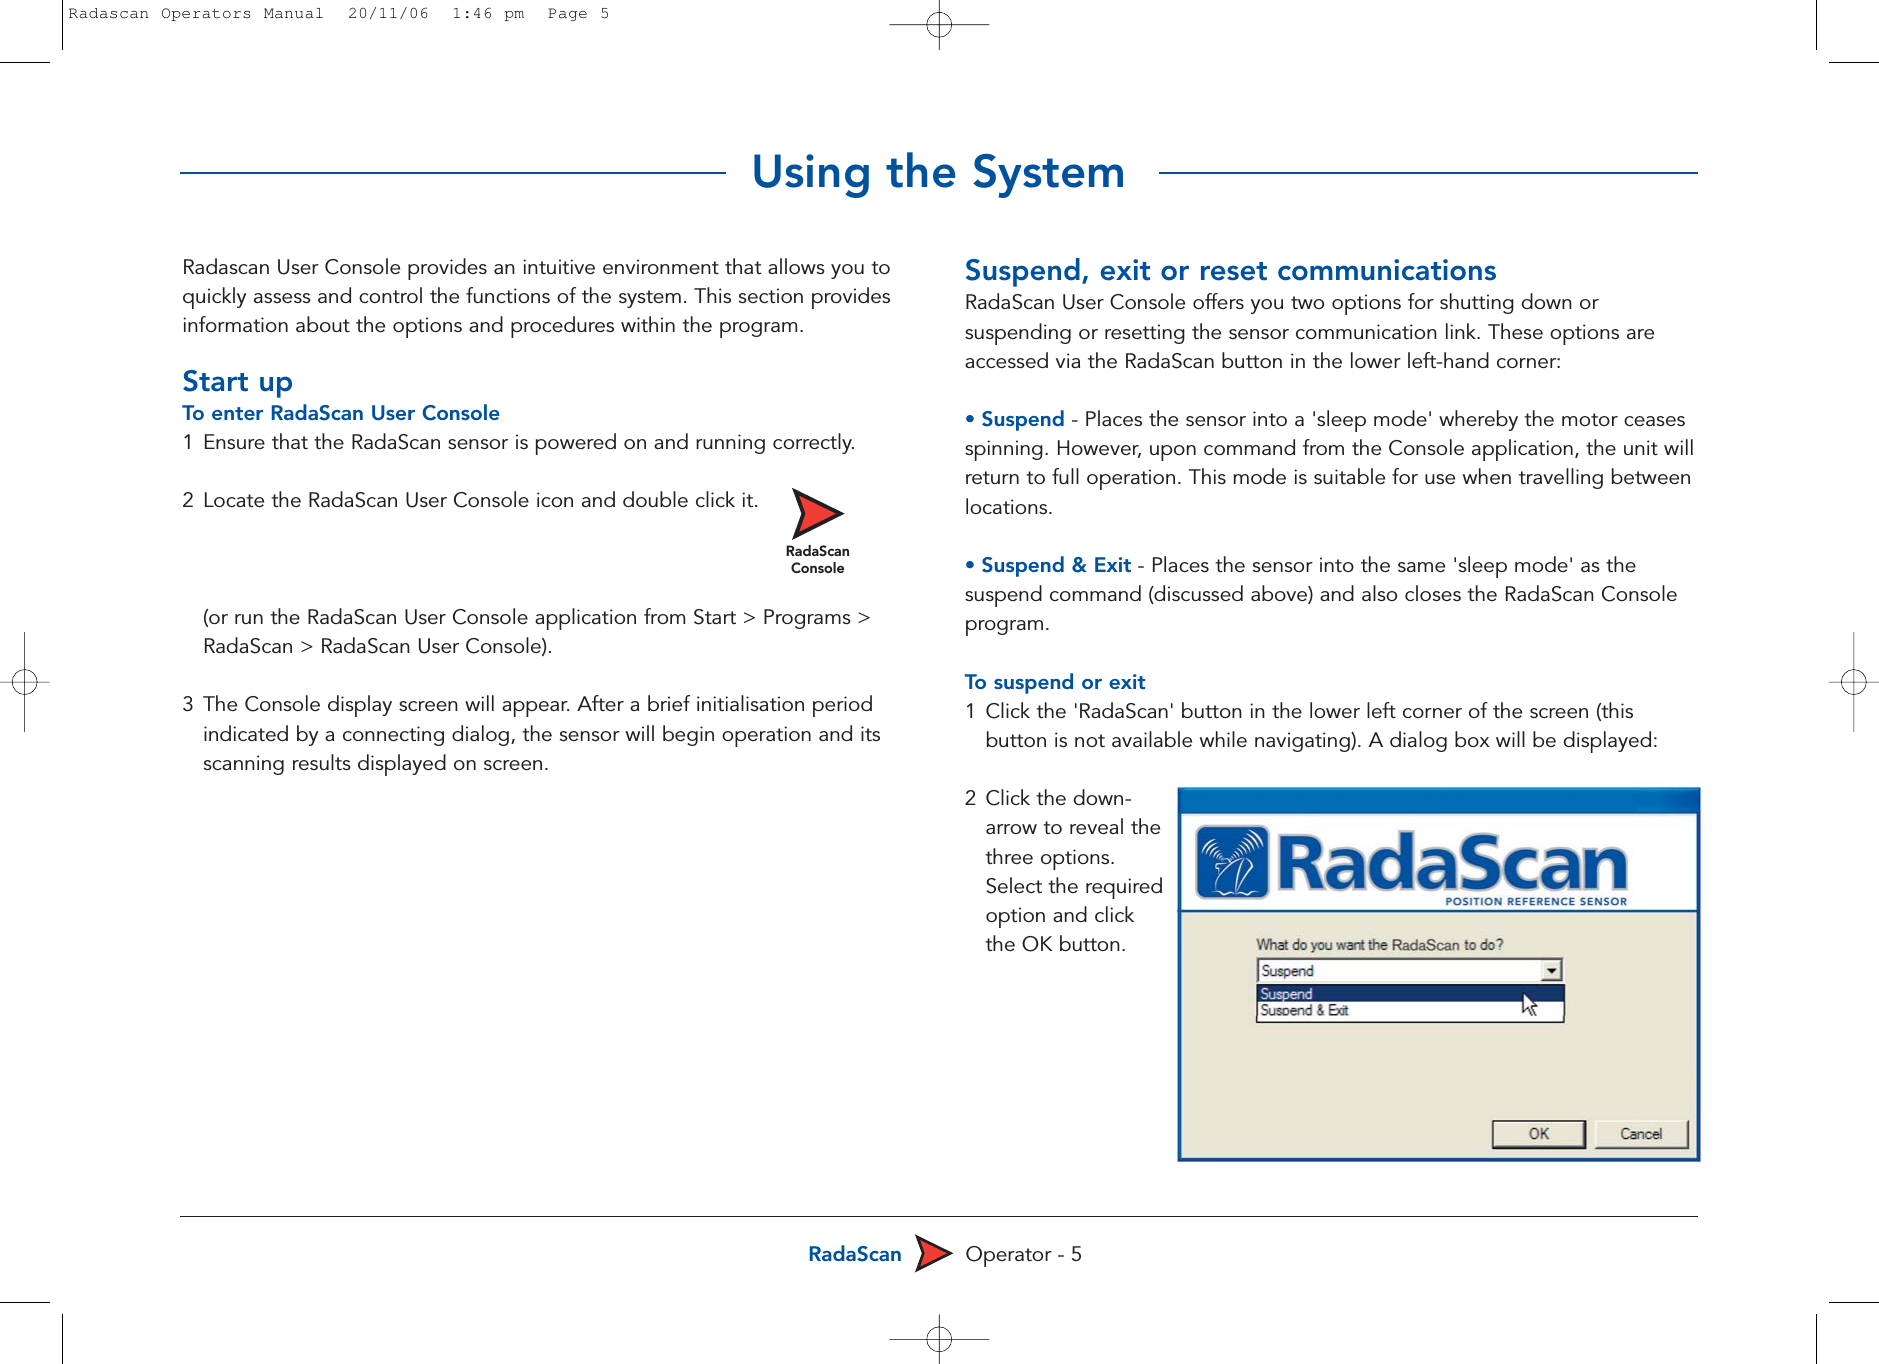 RadaScan Operator - 5Radascan User Console provides an intuitive environment that allows you toquickly assess and control the functions of the system. This section providesinformation about the options and procedures within the program. Start upTo  enter RadaScan User Console1 Ensure that the RadaScan sensor is powered on and running correctly.2 Locate the RadaScan User Console icon and double click it.(or run the RadaScan User Console application from Start &gt; Programs &gt; RadaScan &gt; RadaScan User Console). 3 The Console display screen will appear. After a brief initialisation period indicated by a connecting dialog, the sensor will begin operation and its scanning results displayed on screen.Suspend, exit or reset communicationsRadaScan User Console offers you two options for shutting down orsuspending or resetting the sensor communication link. These options areaccessed via the RadaScan button in the lower left-hand corner: • Suspend - Places the sensor into a &apos;sleep mode&apos; whereby the motor ceasesspinning. However, upon command from the Console application, the unit willreturn to full operation. This mode is suitable for use when travelling betweenlocations.• Suspend &amp; Exit - Places the sensor into the same &apos;sleep mode&apos; as thesuspend command (discussed above) and also closes the RadaScan Consoleprogram.To  suspend or exit1Click the &apos;RadaScan&apos; button in the lower left corner of the screen (this button is not available while navigating). A dialog box will be displayed:2 Click the down-arrow to reveal thethree options.Select the requiredoption and click the OK button.Using the SystemRadaScanConsoleRadascan Operators Manual  20/11/06  1:46 pm  Page 5